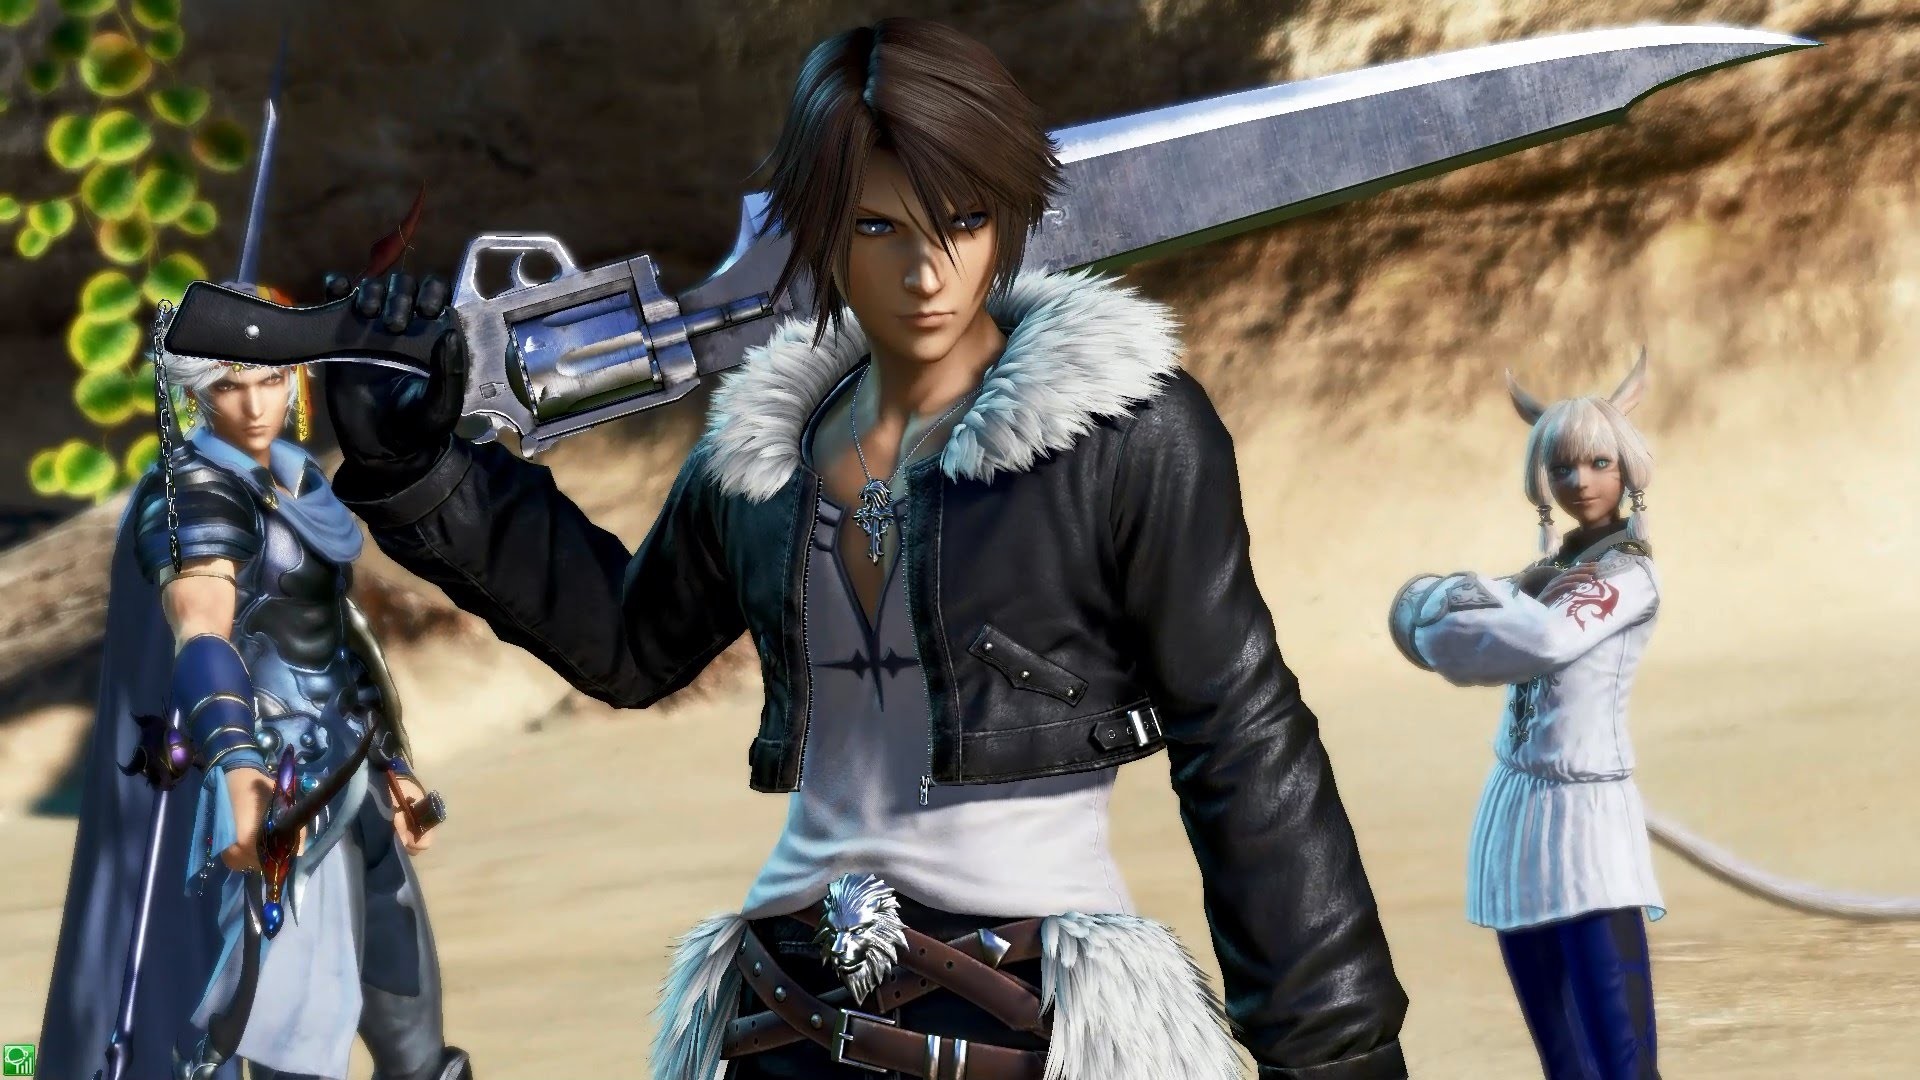 1920x1080 Squall Leonhart is the main protagonist of Final Fantasy VIII.